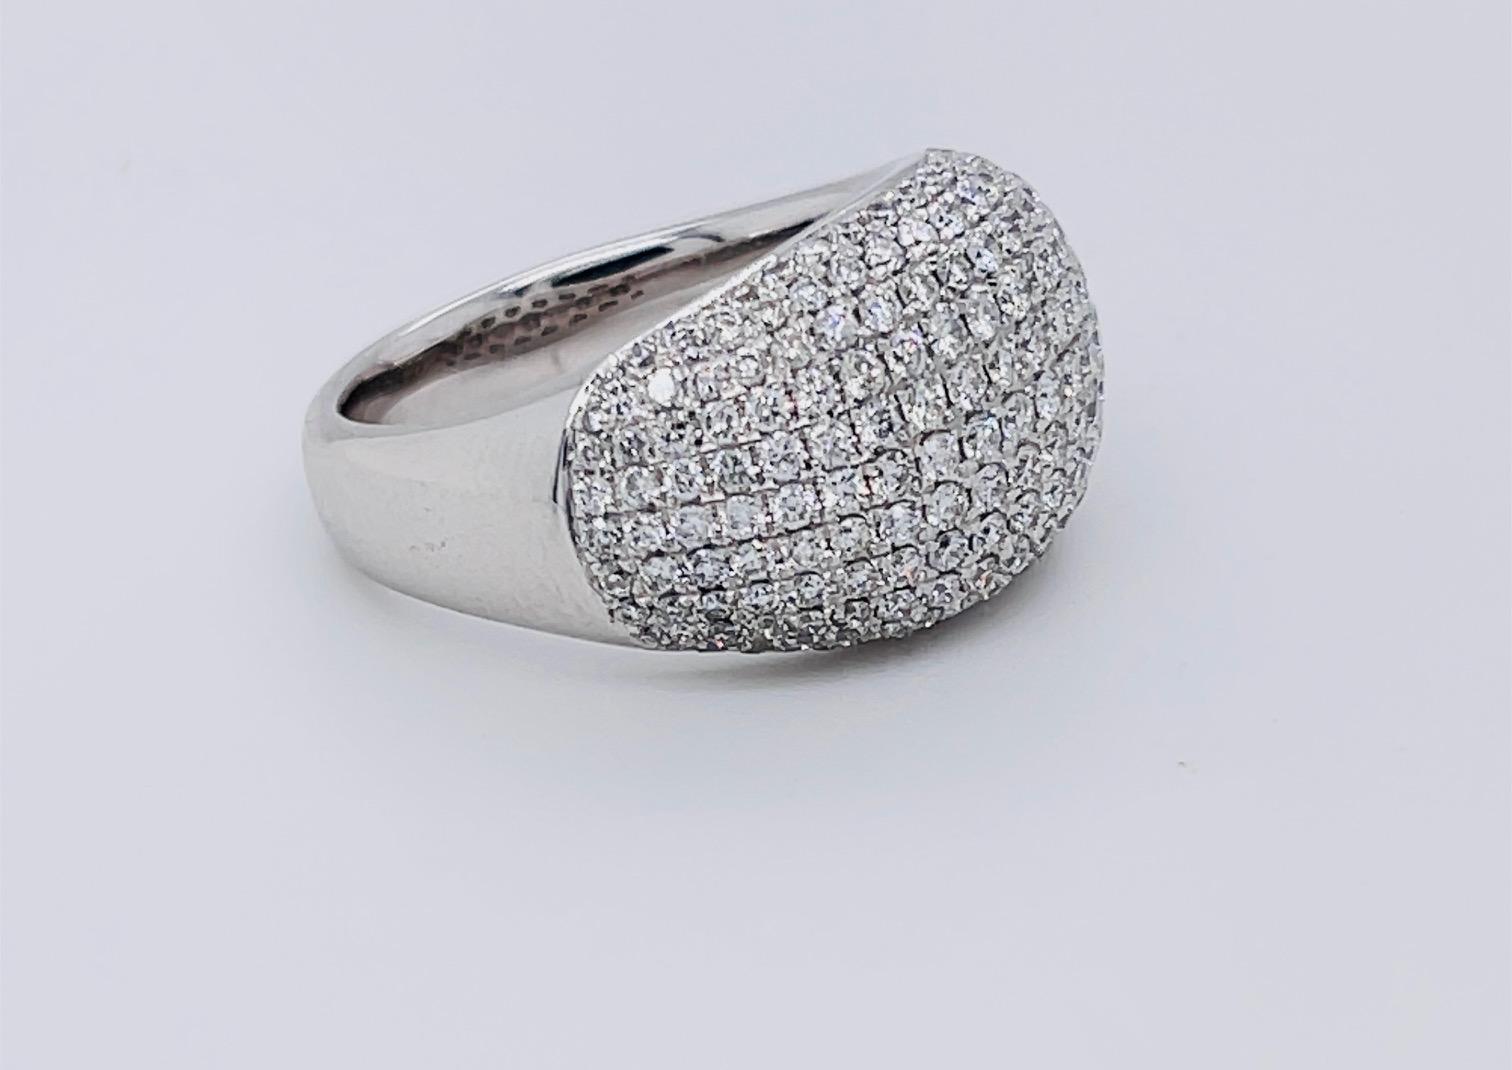 Diamond Pave 1.75 carats Dome Ring 14K White Gold

215 Round Diamonds Total Carat Weight 1.75 carats

G Color SI Clarity

Top Dimension: 12.8mm

Set in 14K White Gold

Ring size 7

Stock# : J5670